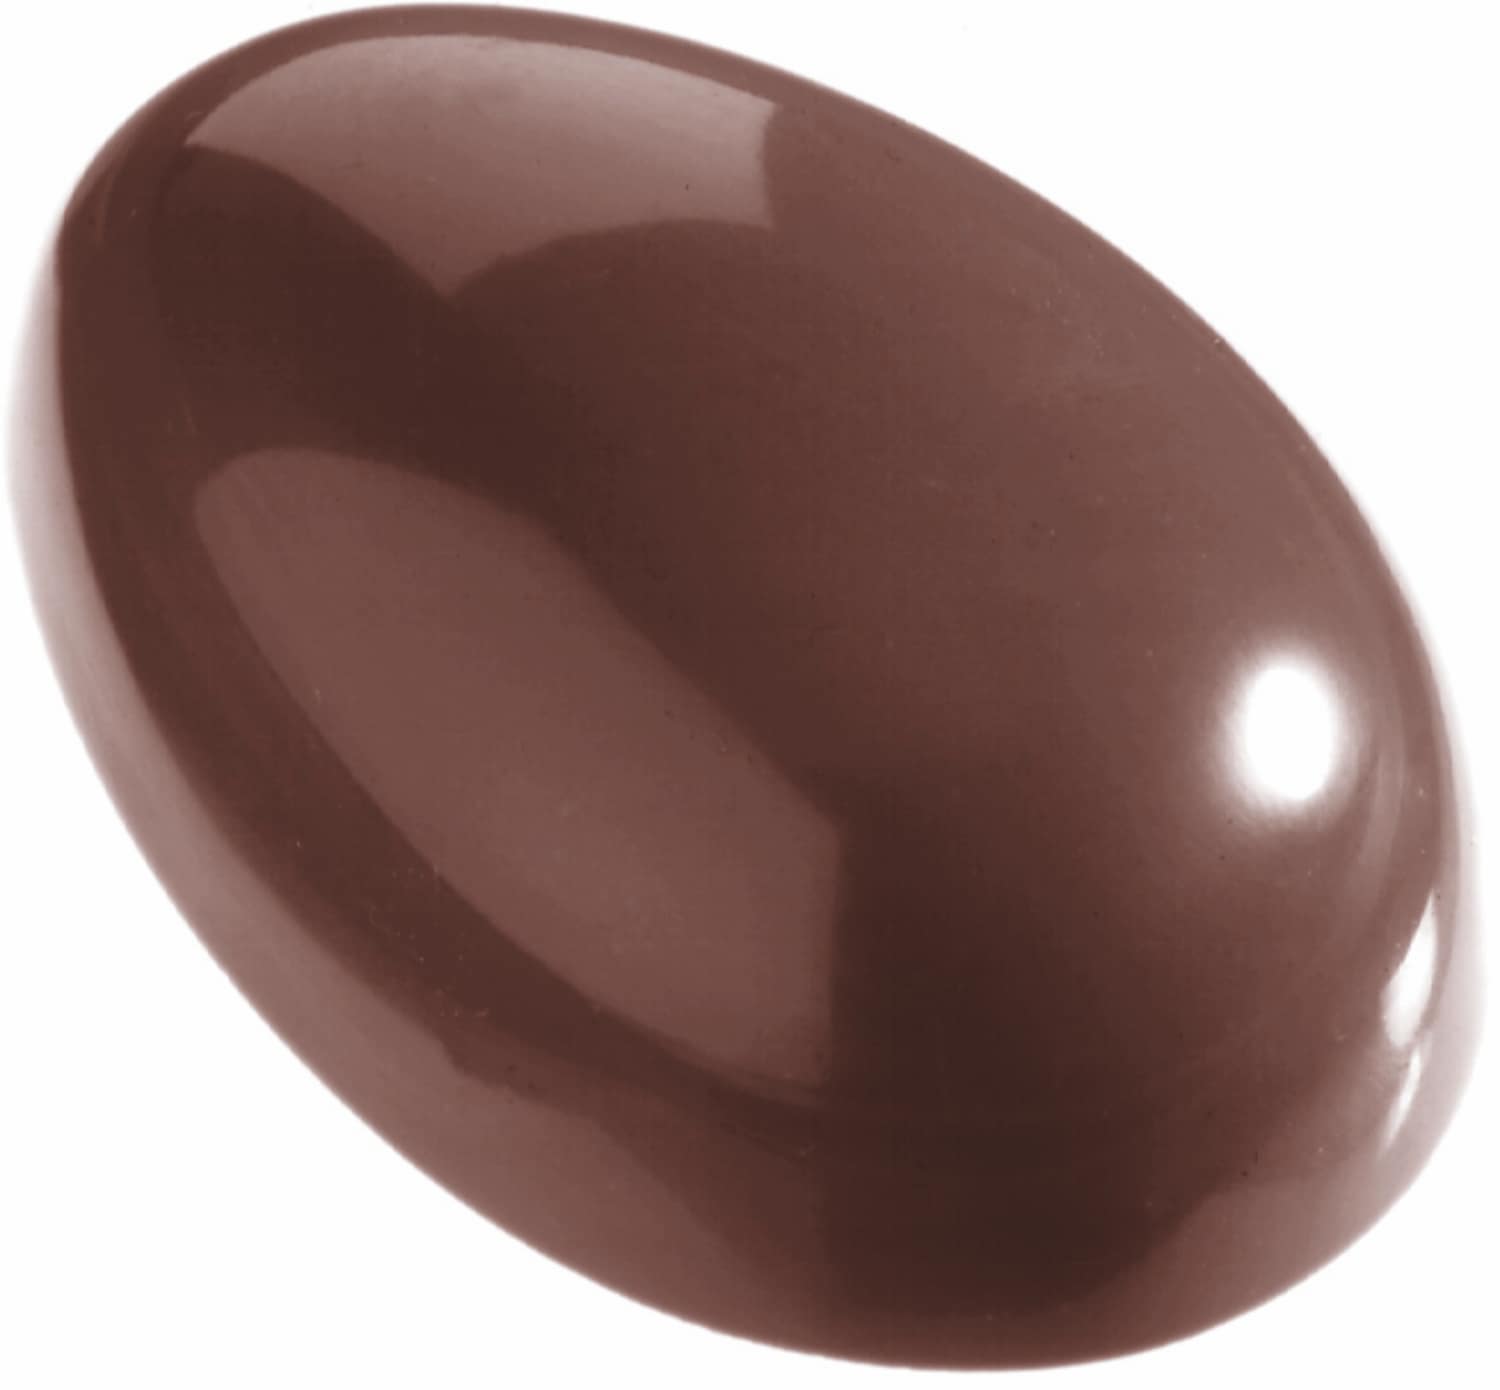 Chocolate mould "Easter egg" 421251